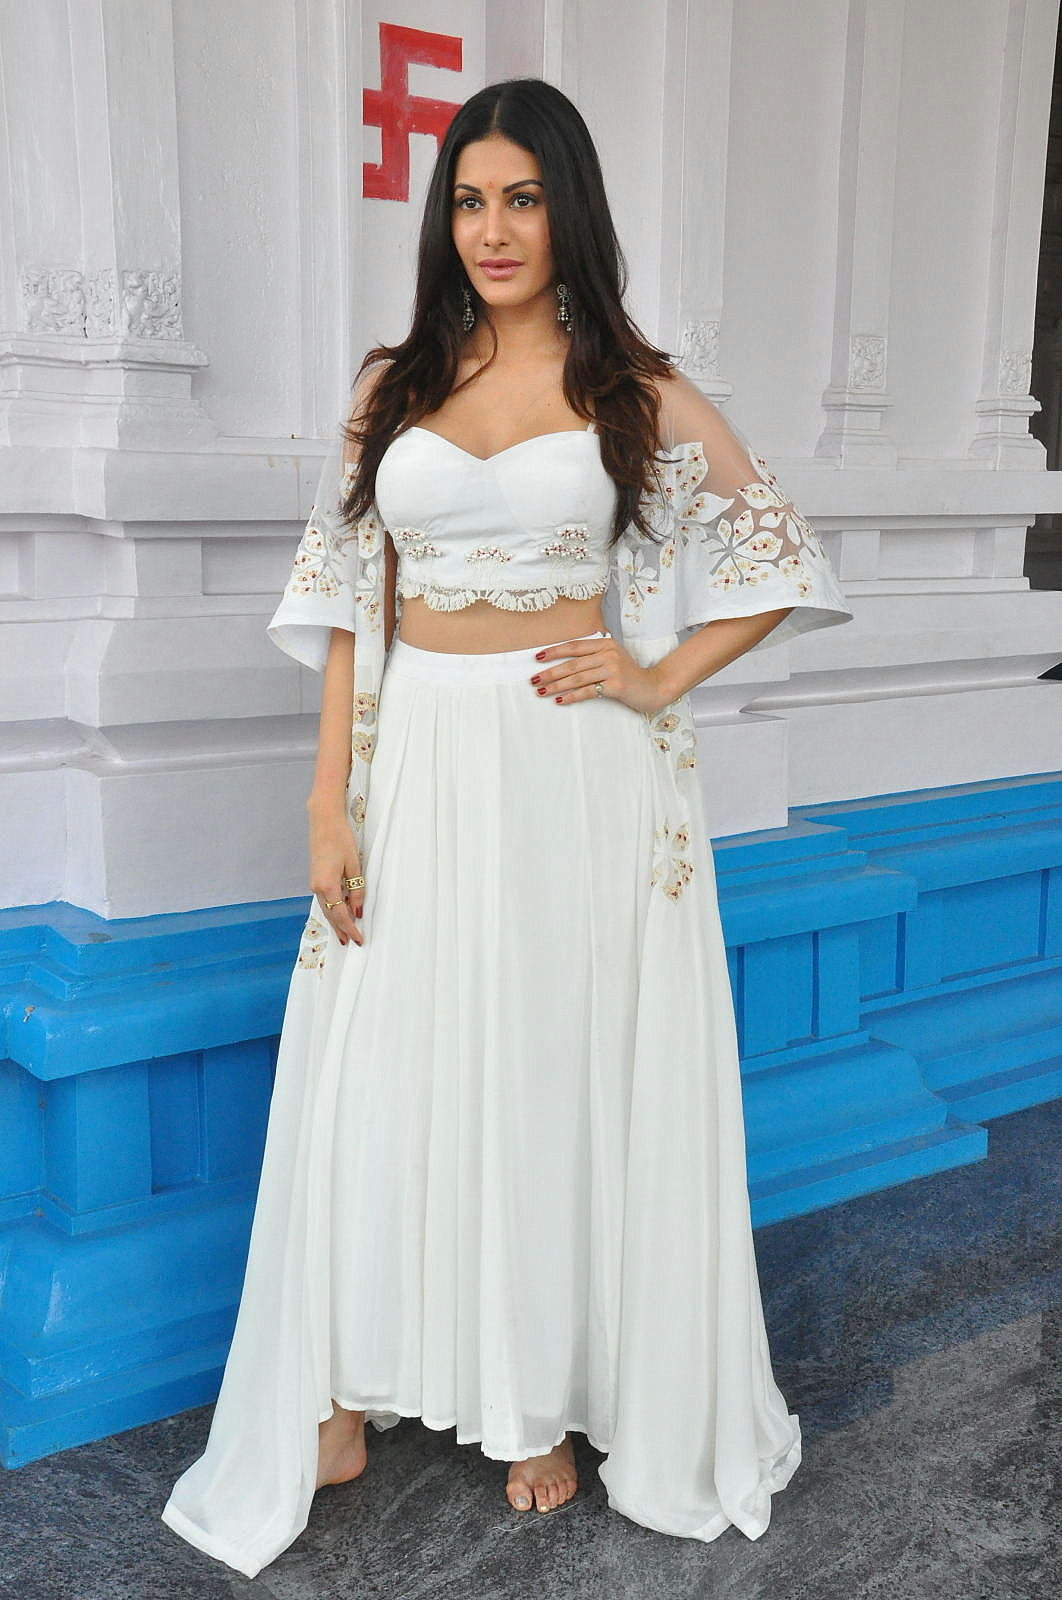 Amyra Dastur Looks Super Hot in a Revealing White Dress At Anandi Indira Production LLP Production no 1 Opening Event in Hyderabad